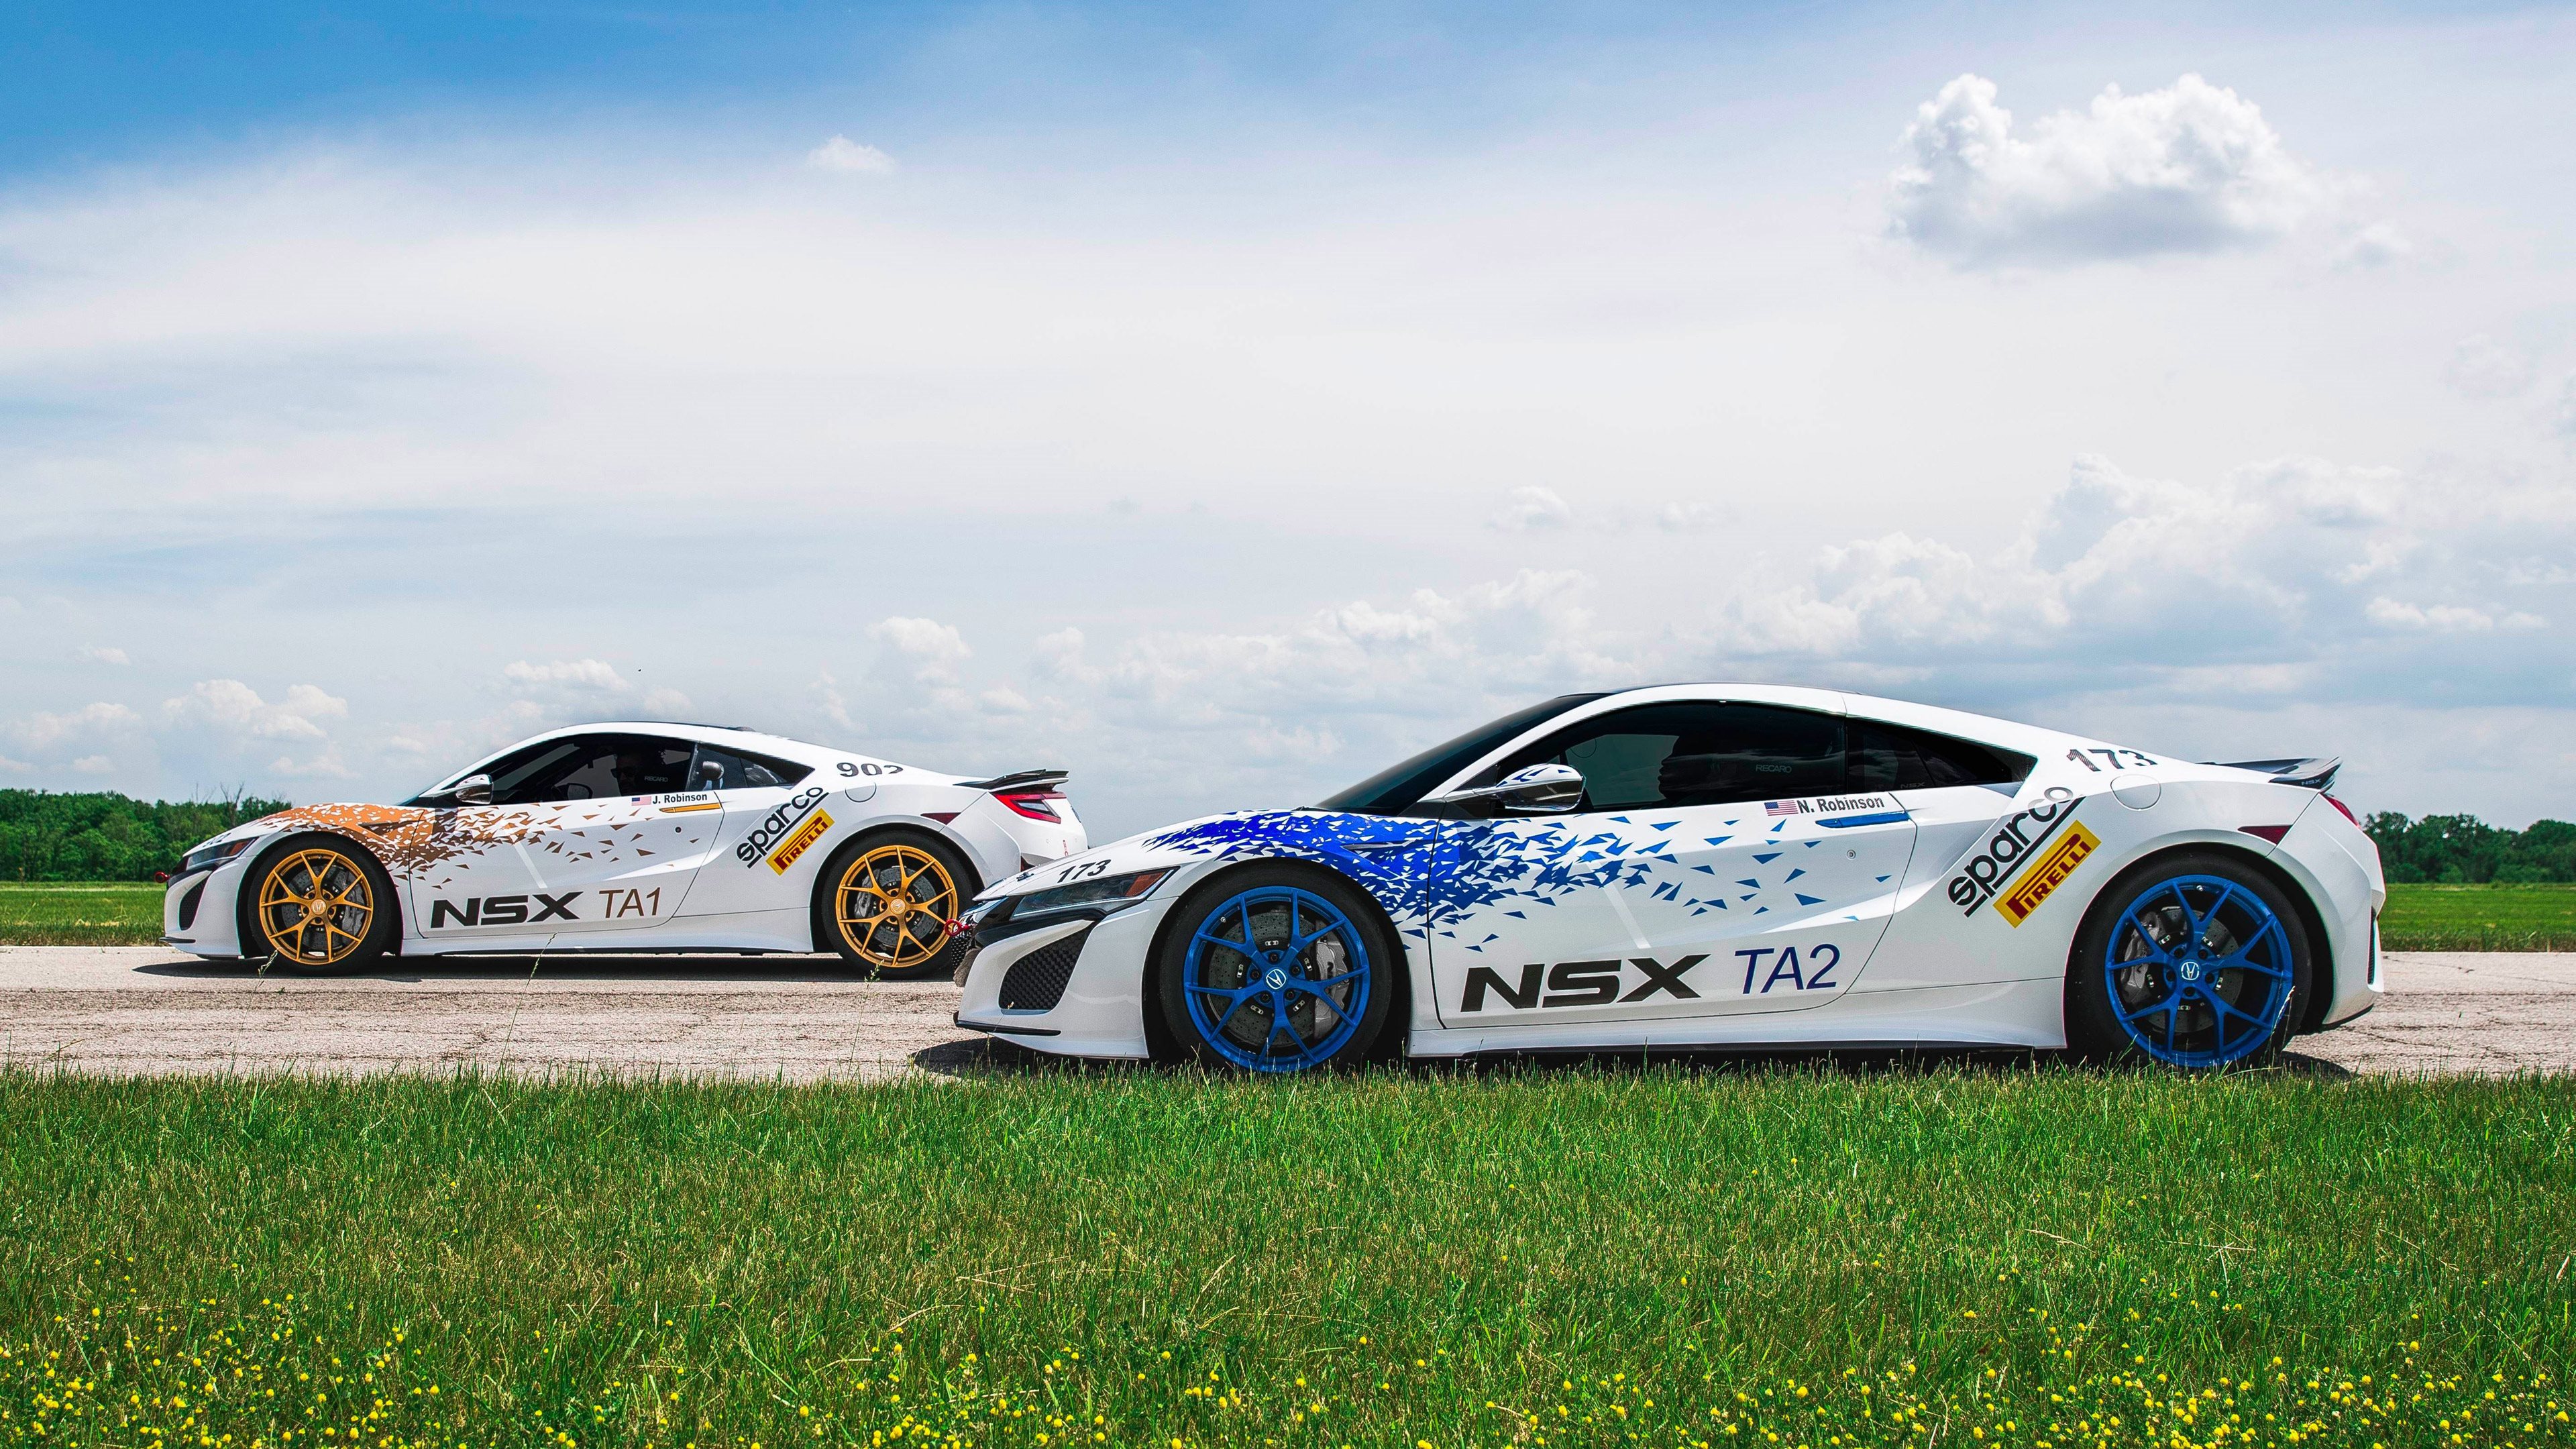 Acura Nsx Japanese Cars 2017 4k Window Backgrounds - 2017 Nsx Pikes Peak , HD Wallpaper & Backgrounds